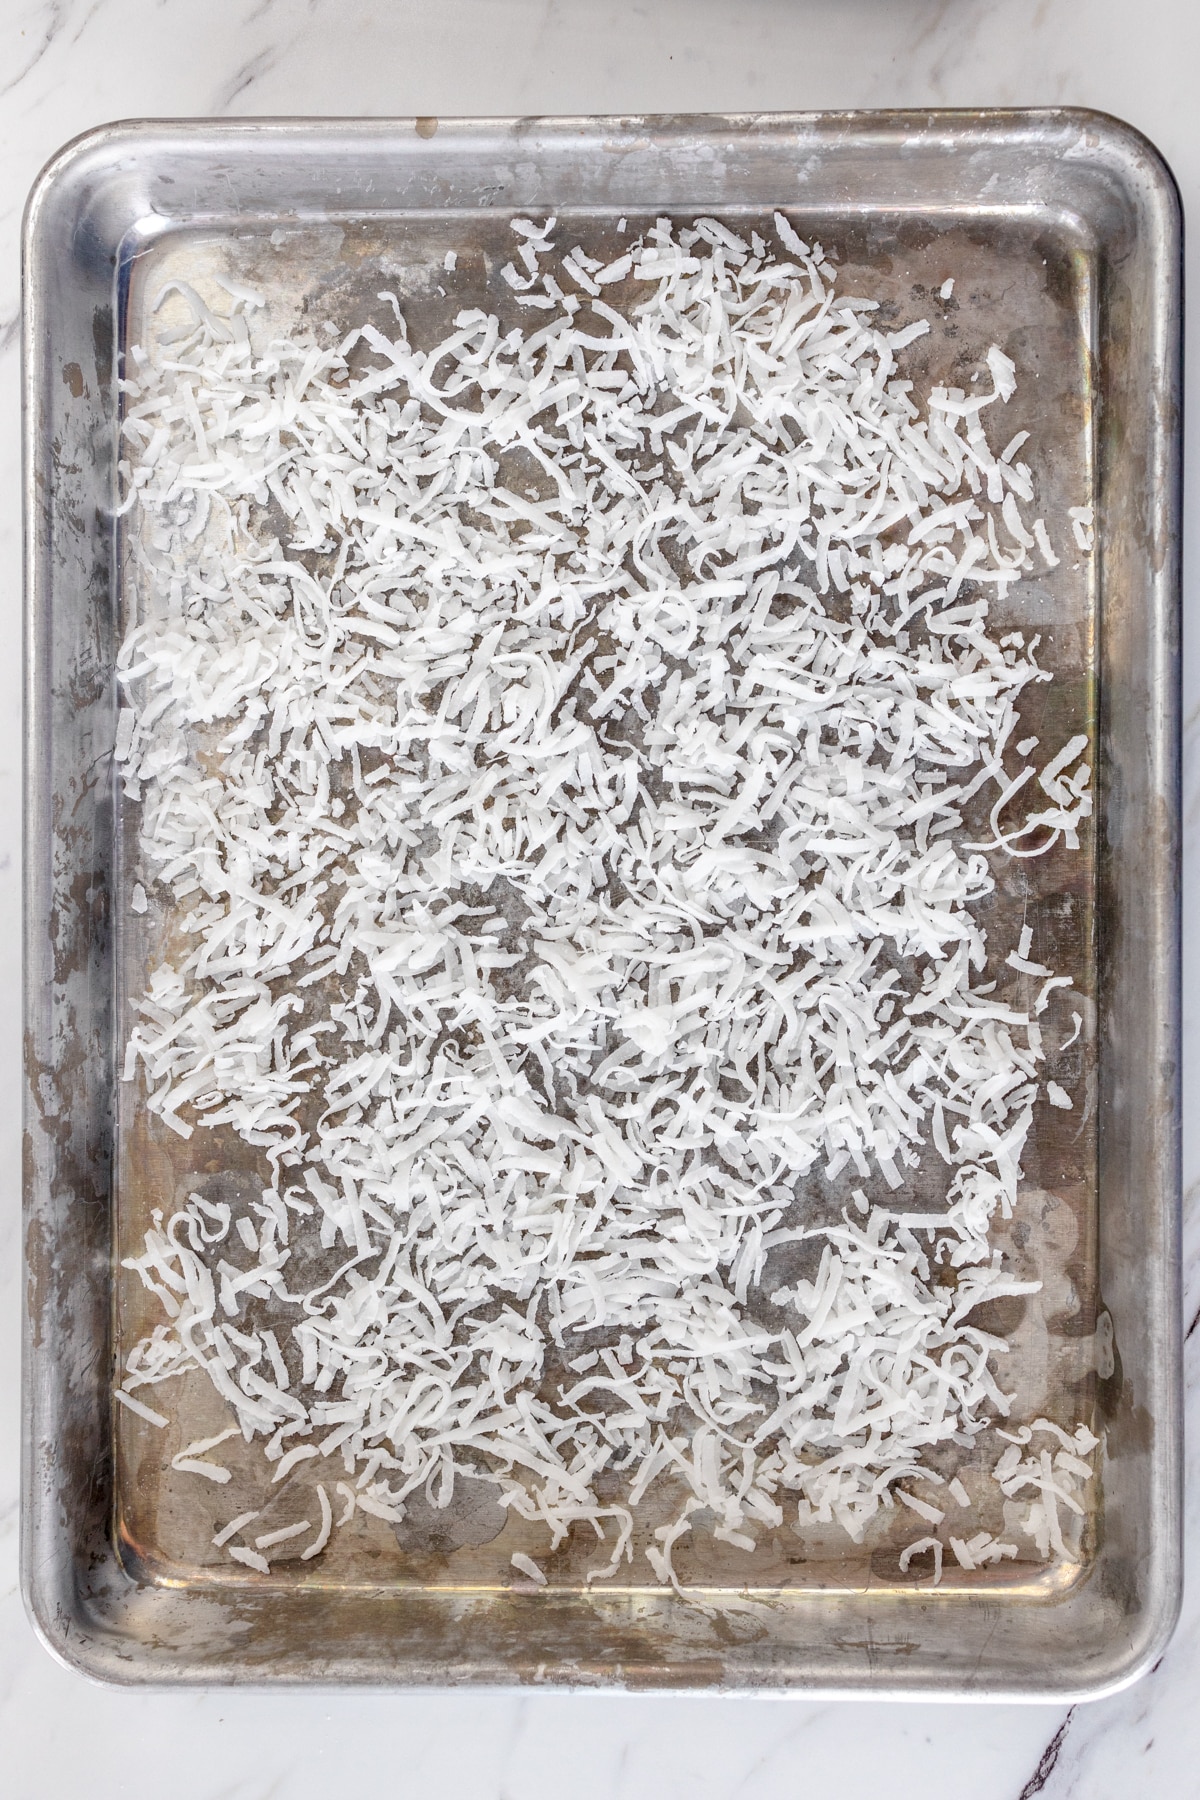 Top view of shredded coconut on a baking tray before being toasted.